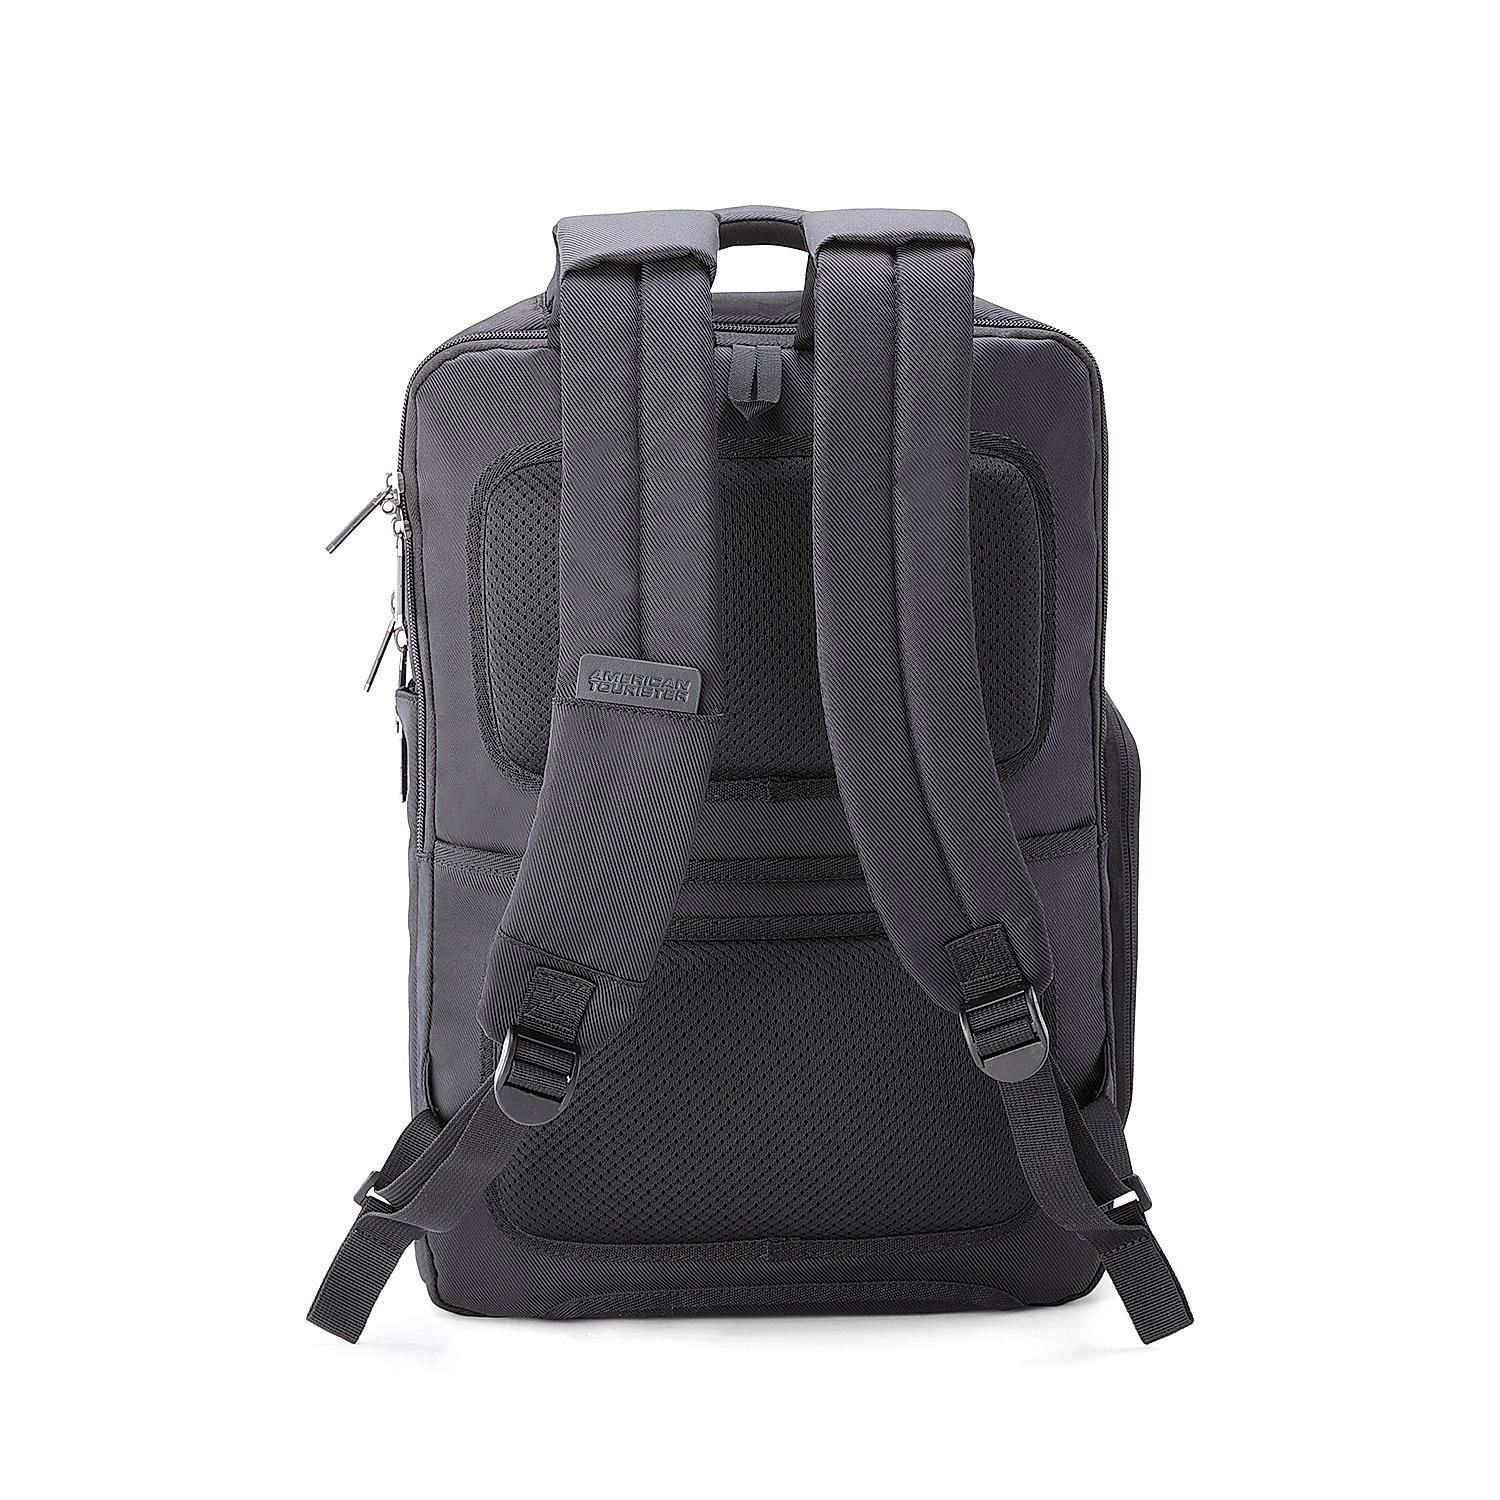 Buy Black Rubio Backpack 02 for Office Online at American Tourister ...